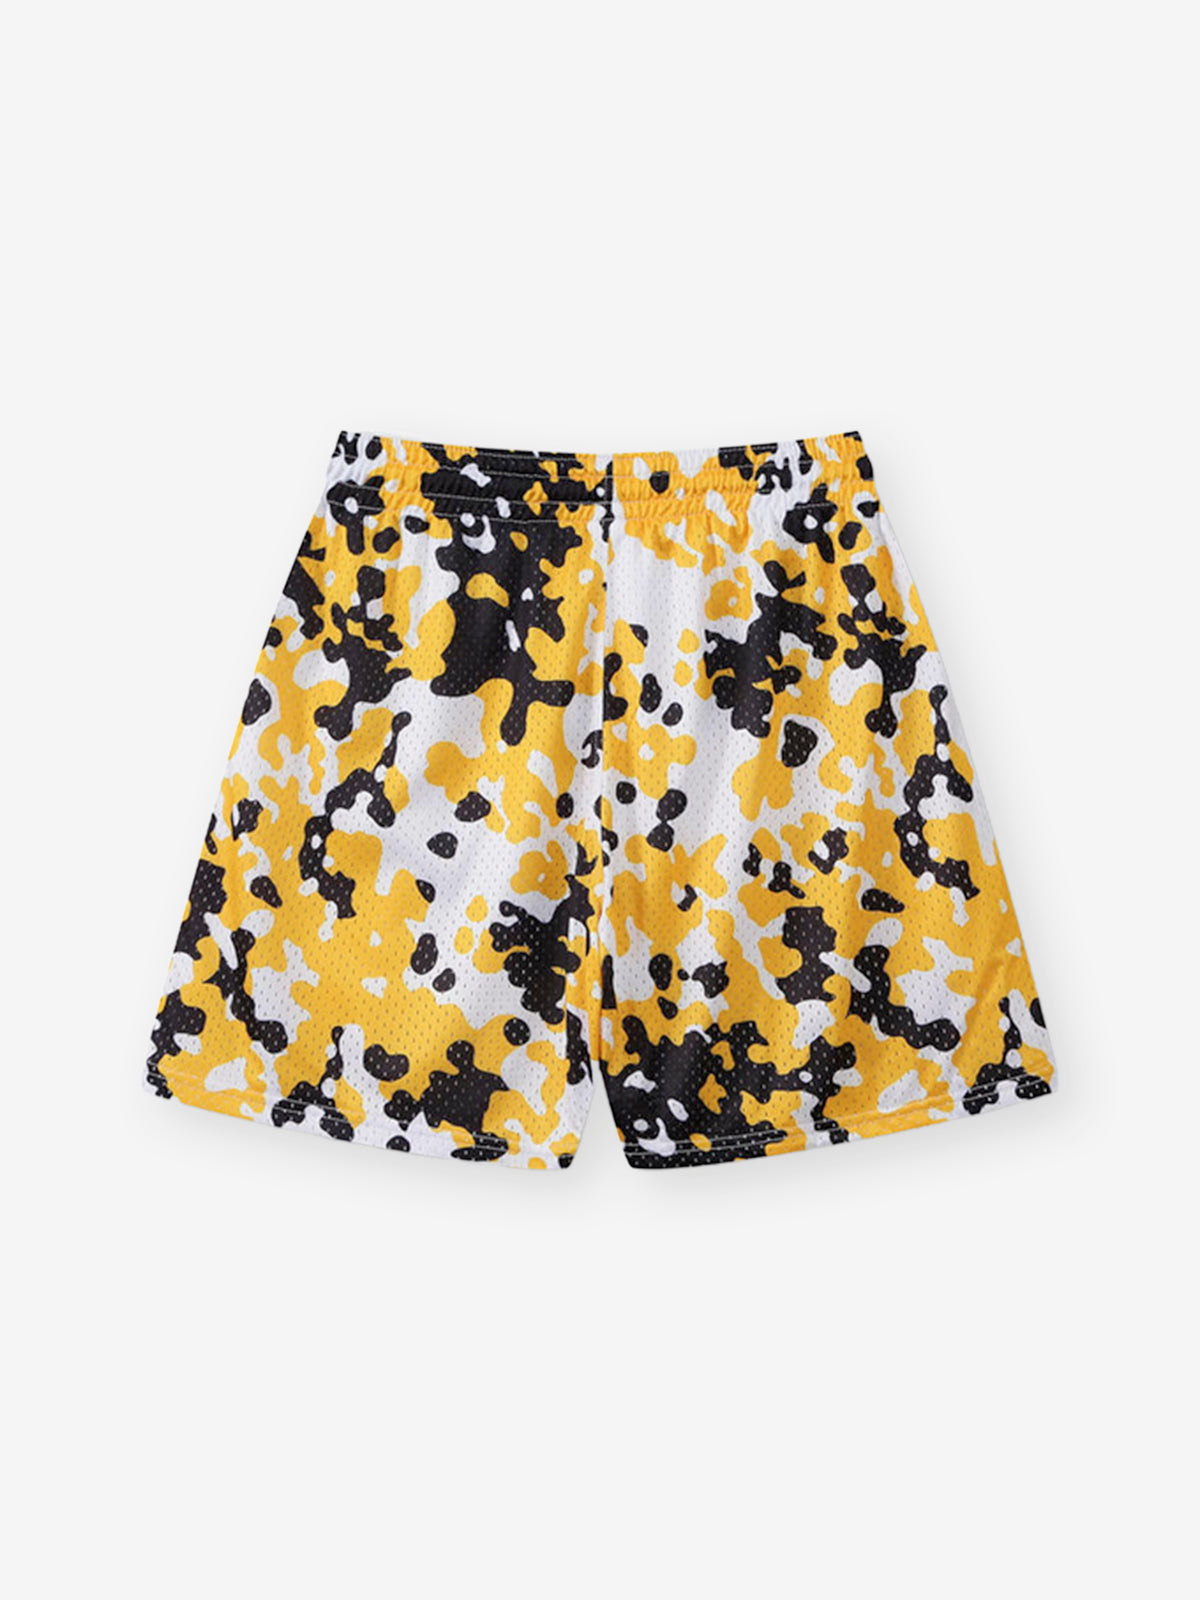 BOUNCE BACK© camouflage-print double-layer sports shorts